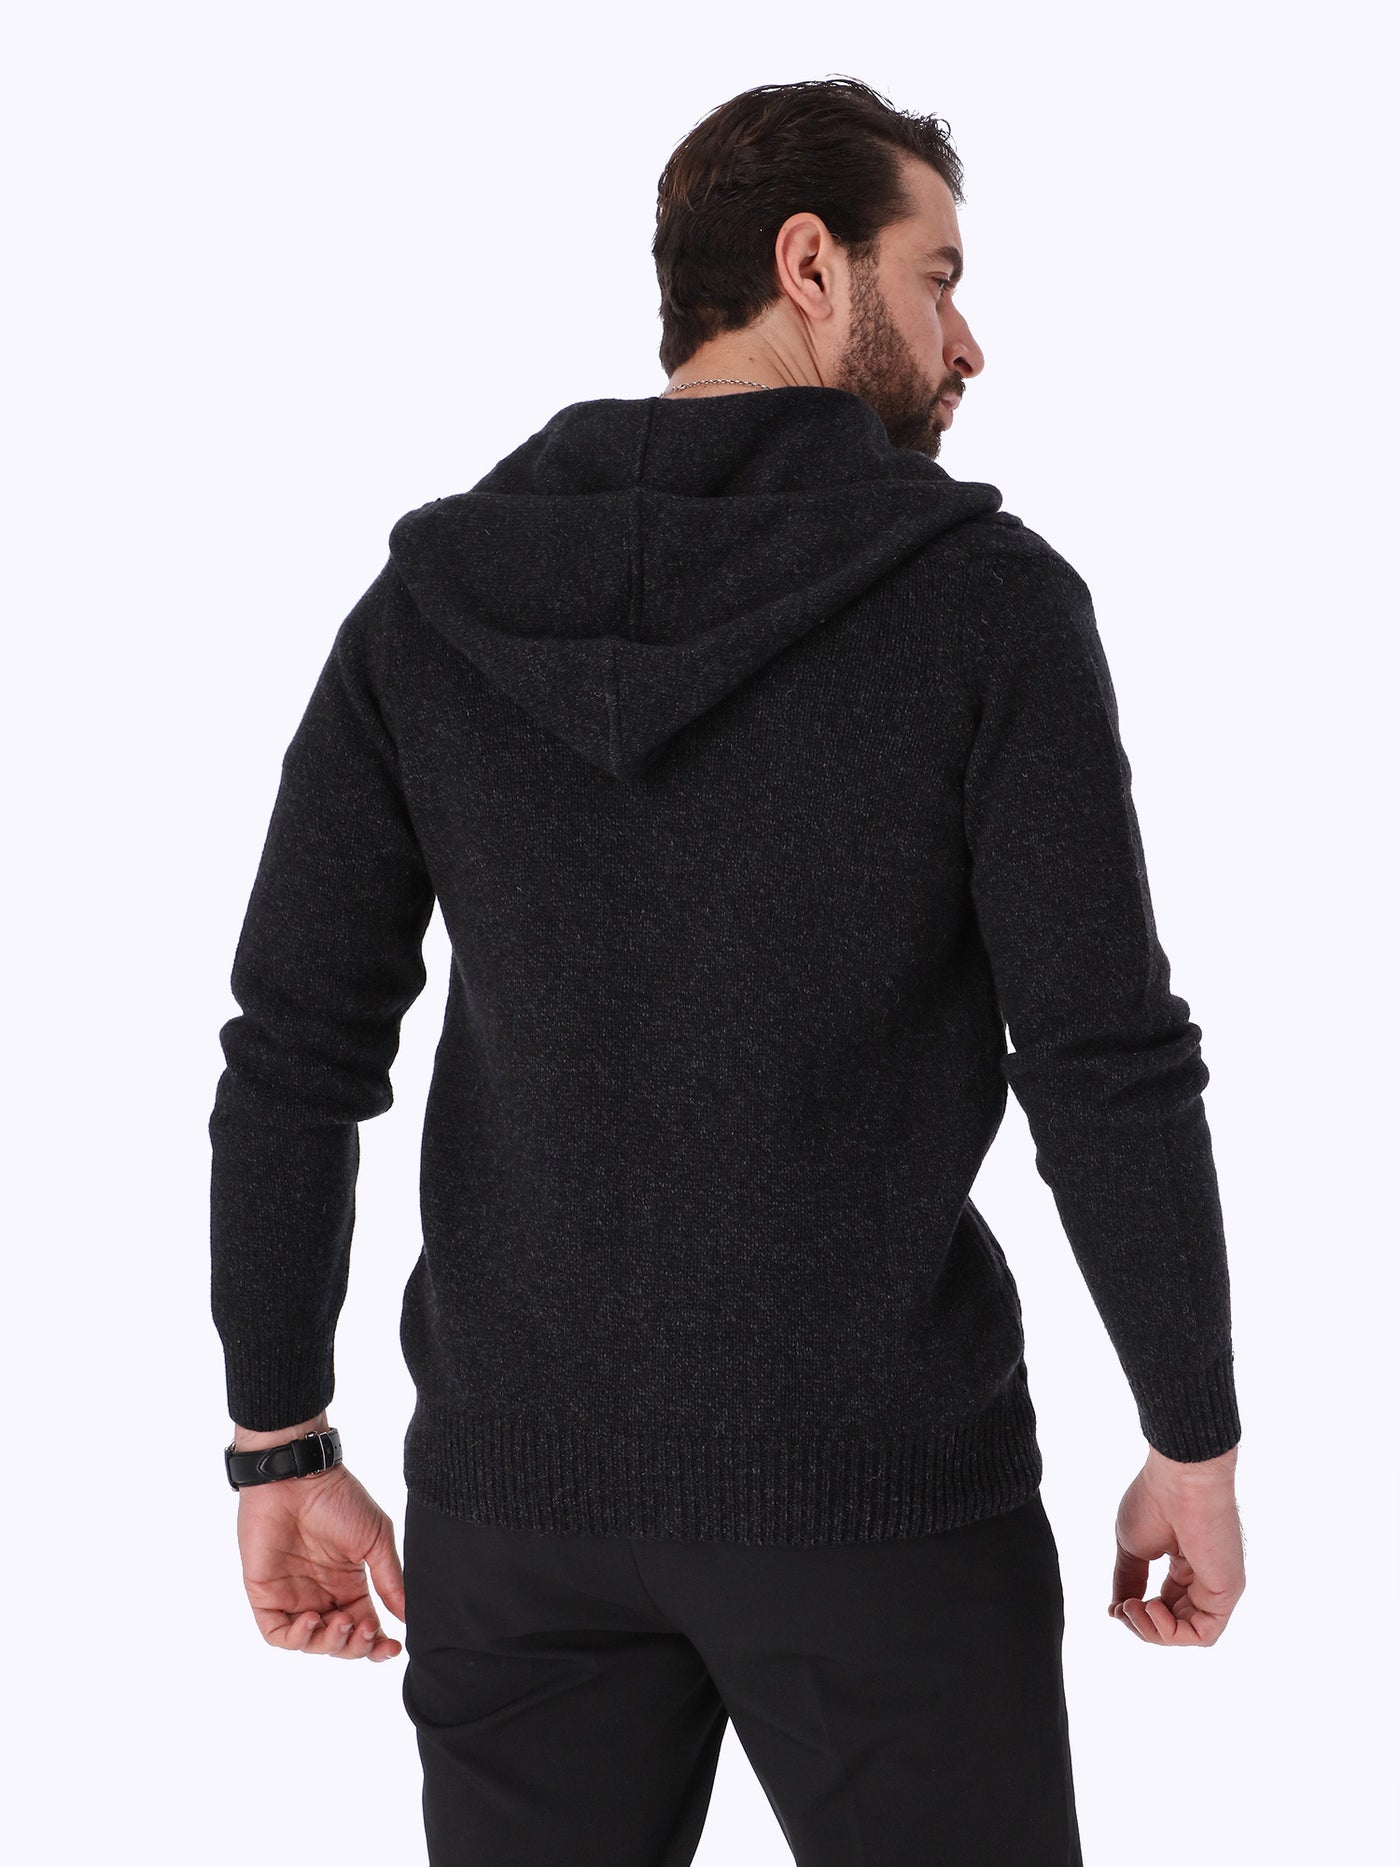 Sweater - Zipped Knitted